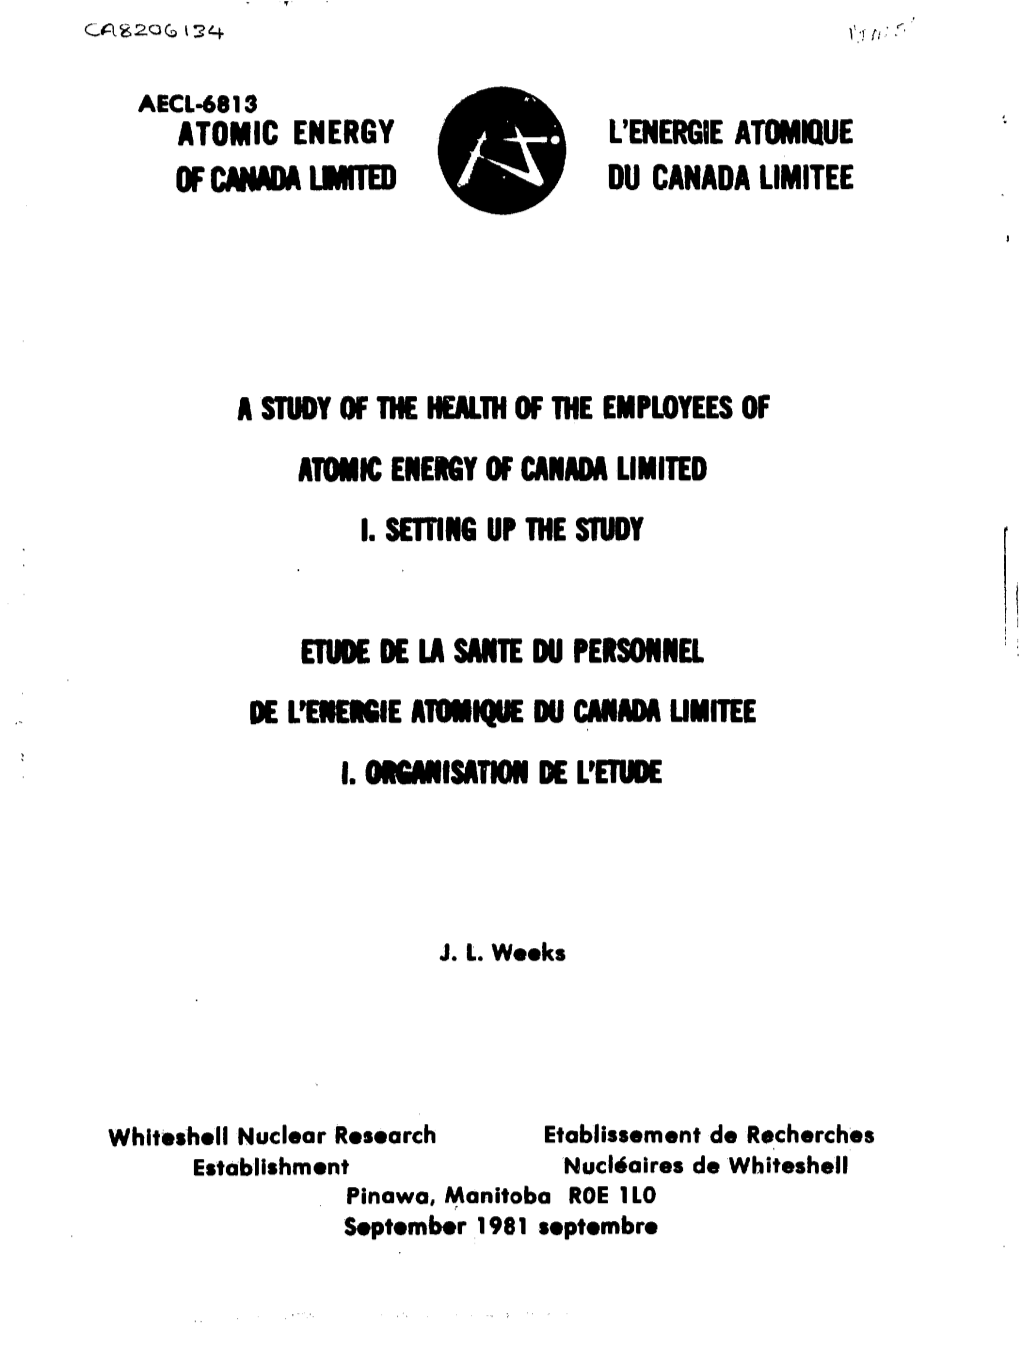 A Study of the Health of the Employees of Atomic Energy of Canada Limited